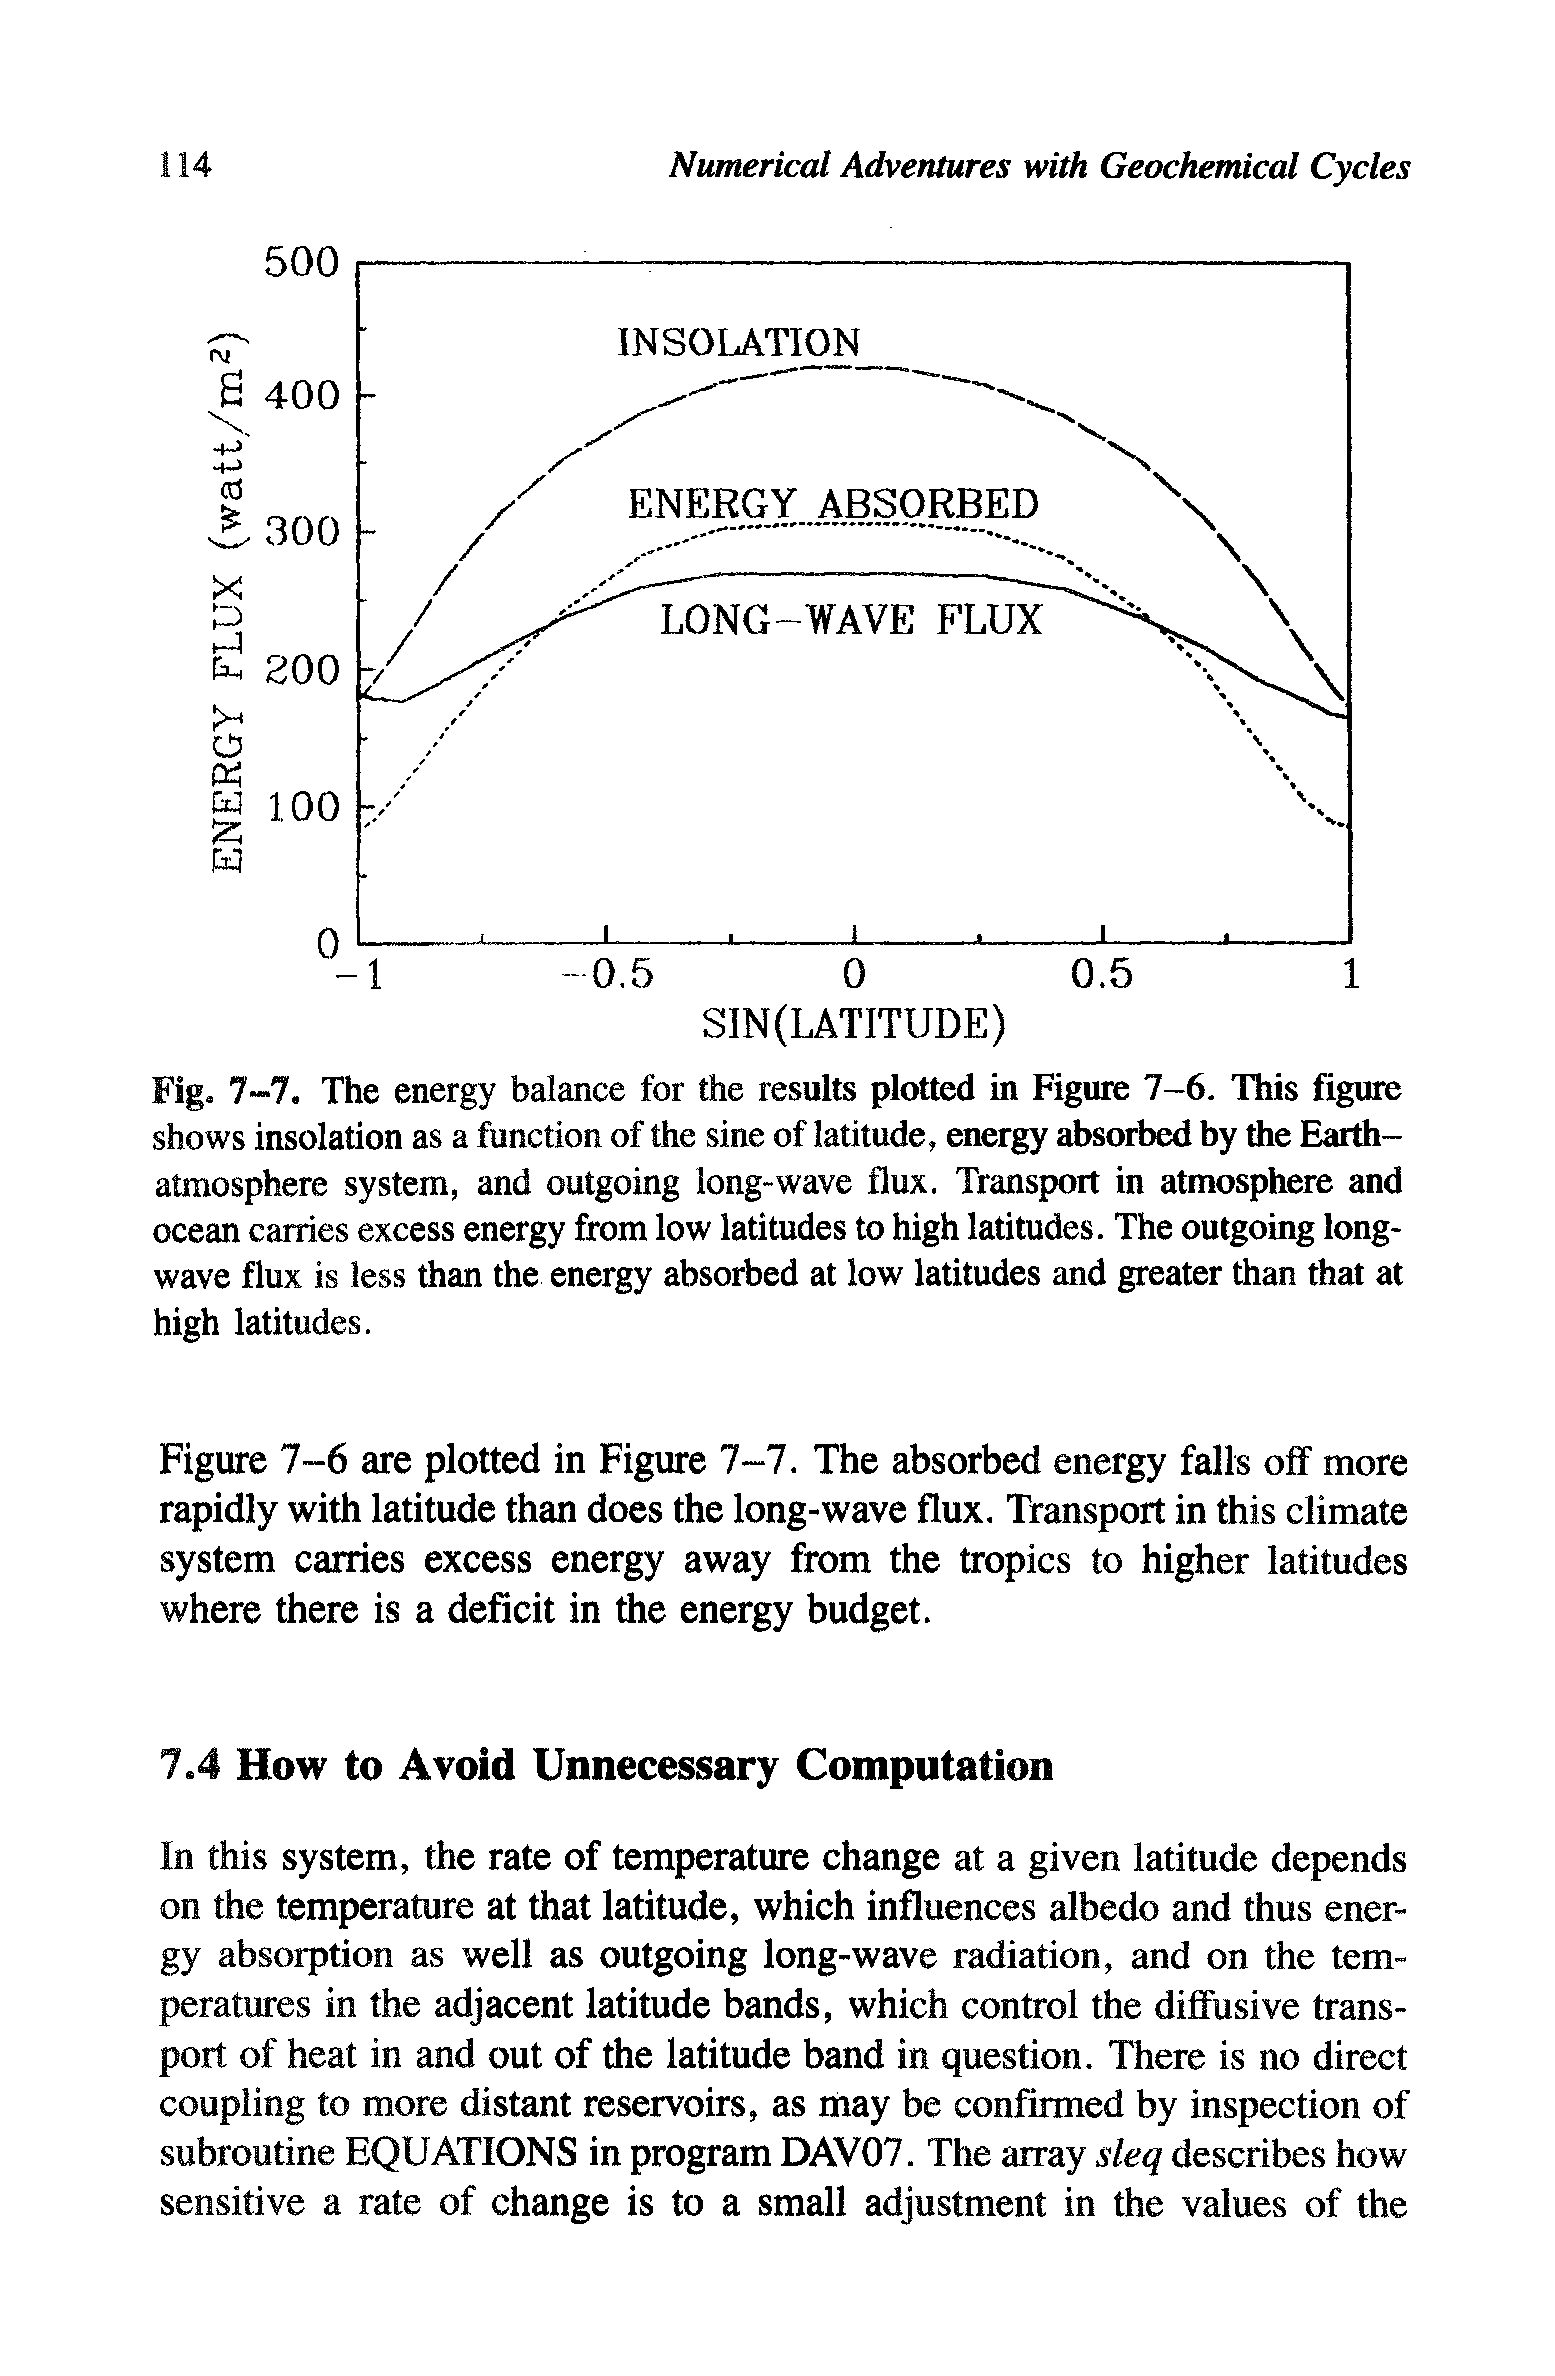 Figure 7-6 are plotted in Figure 7-7. The absorbed energy falls off more rapidly with latitude than does the long-wave flux. Transport in this climate system carries excess energy away from the tropics to higher latitudes where there is a deficit in the energy budget.